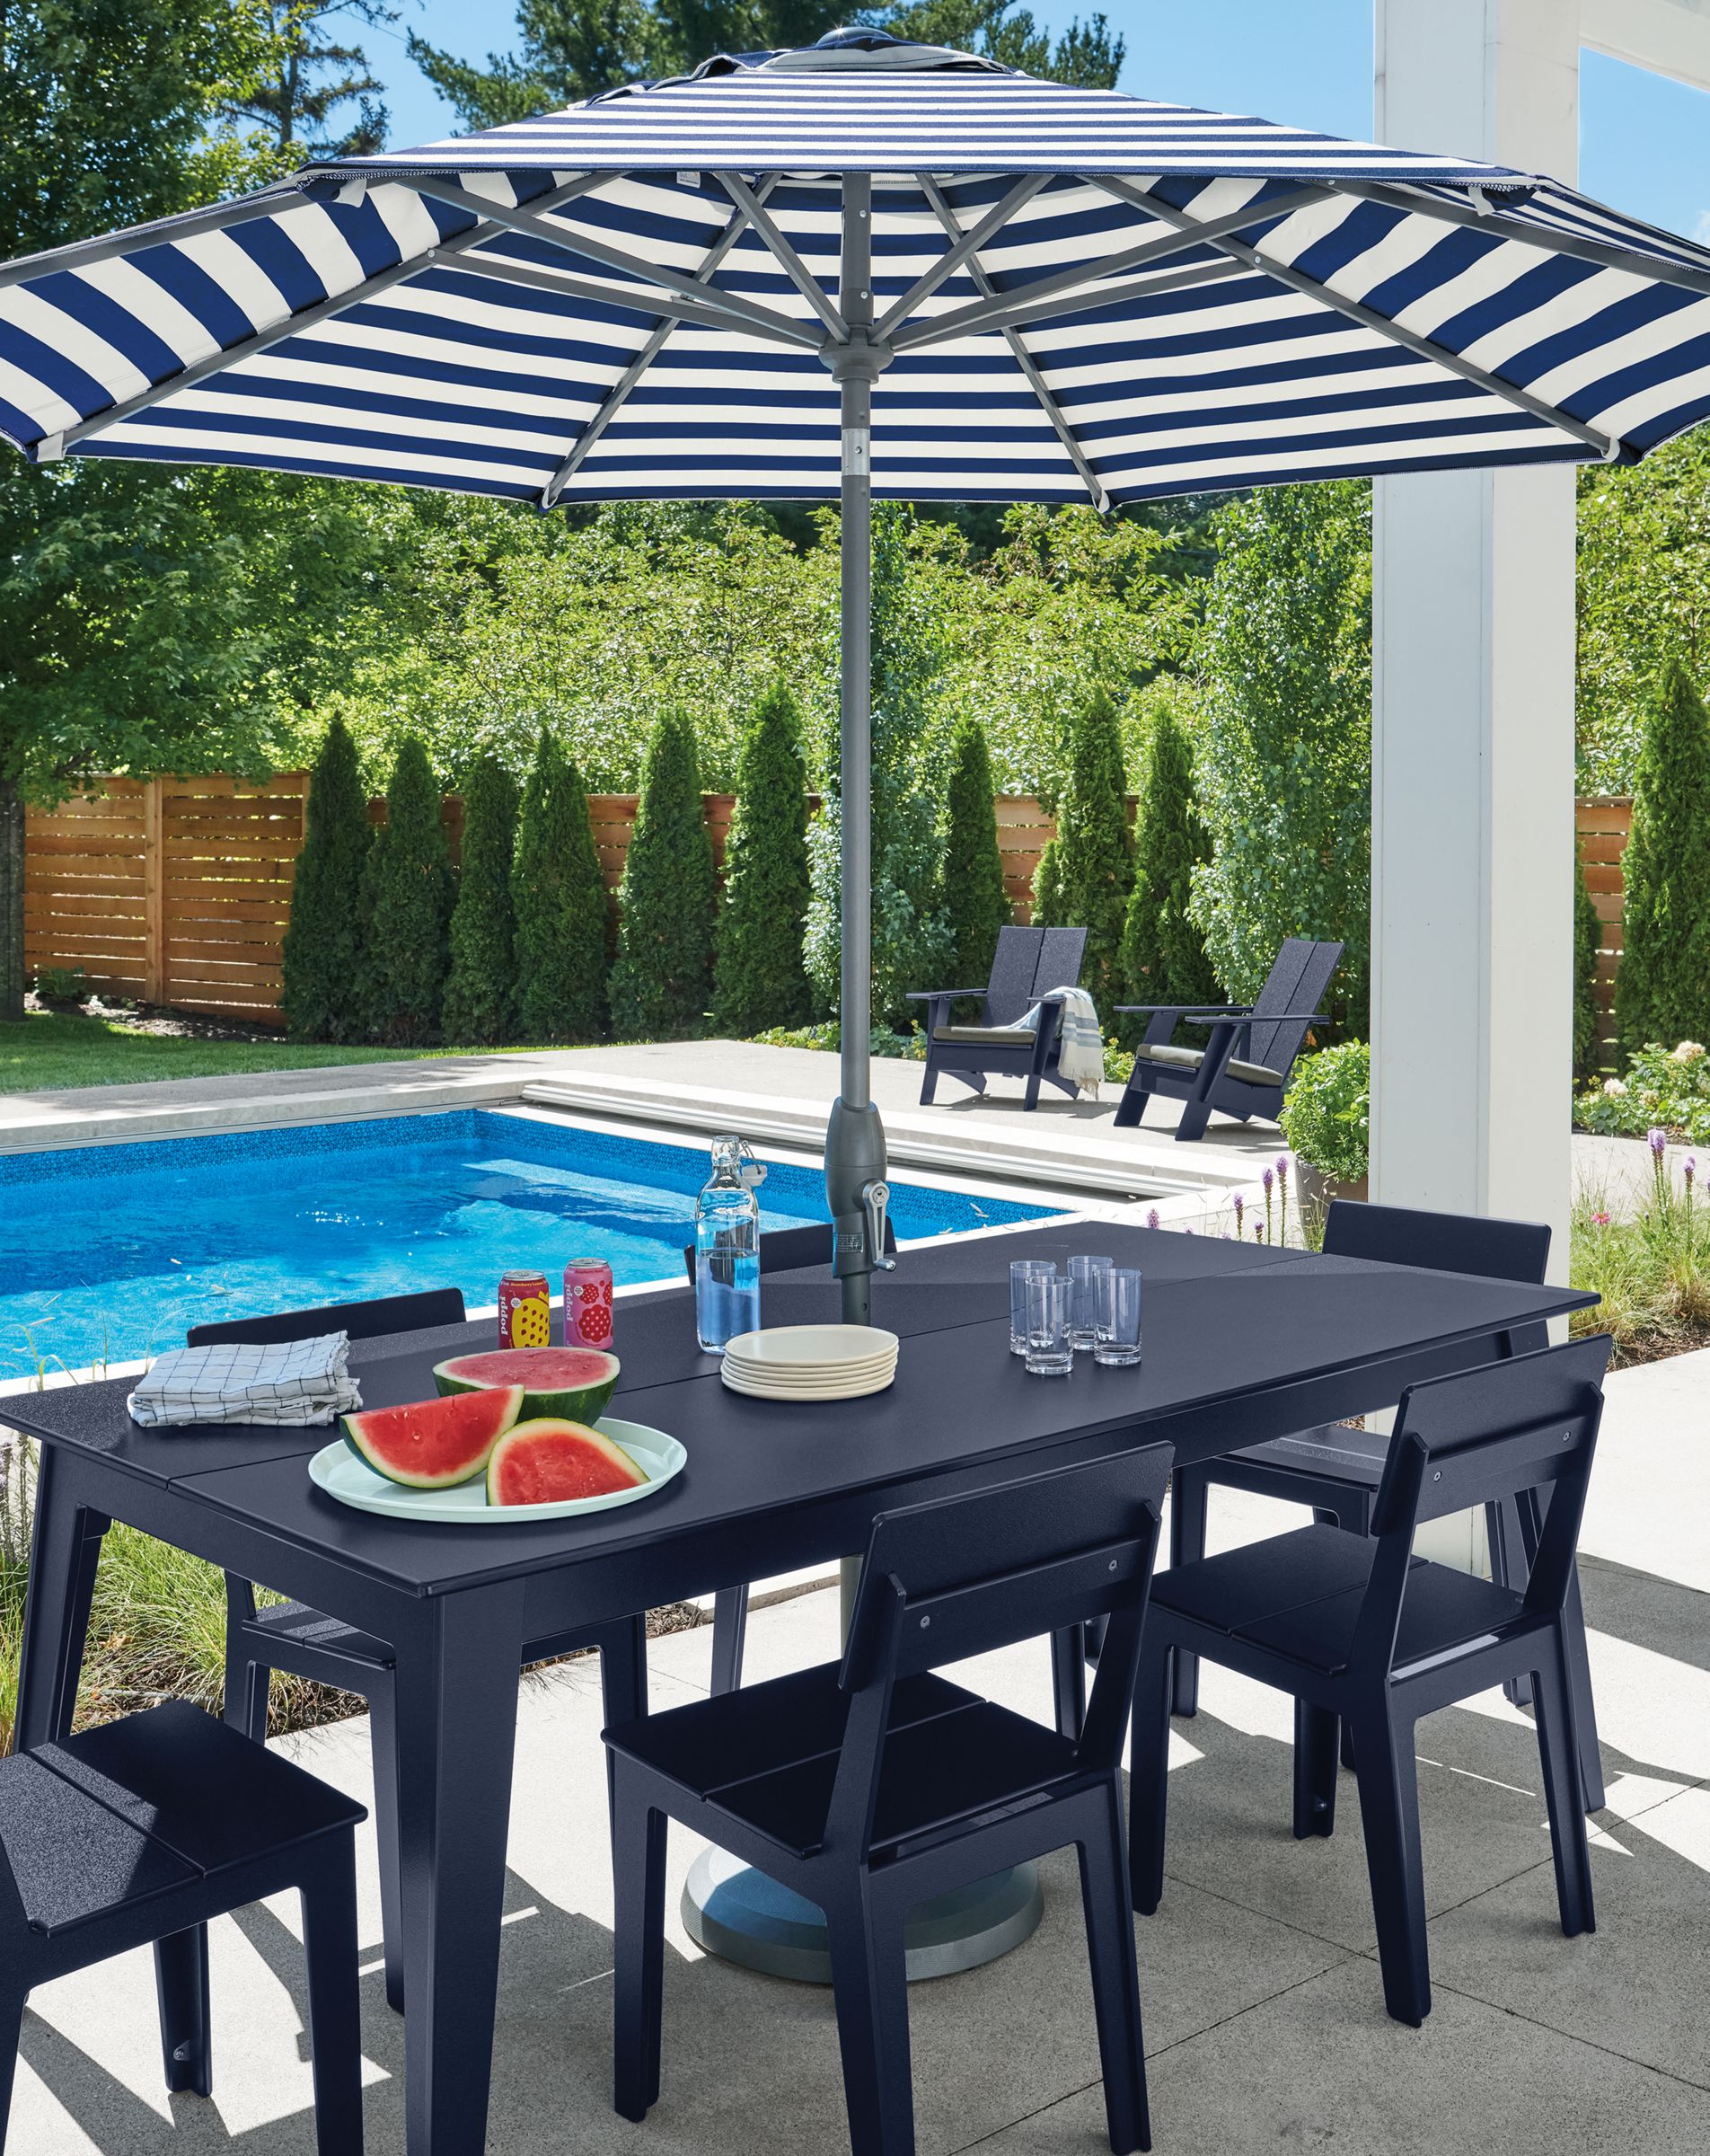 Aspen outdoor dining table and chairs in navy with Oahu 9 foot umbrella in Watts Navy fabric.